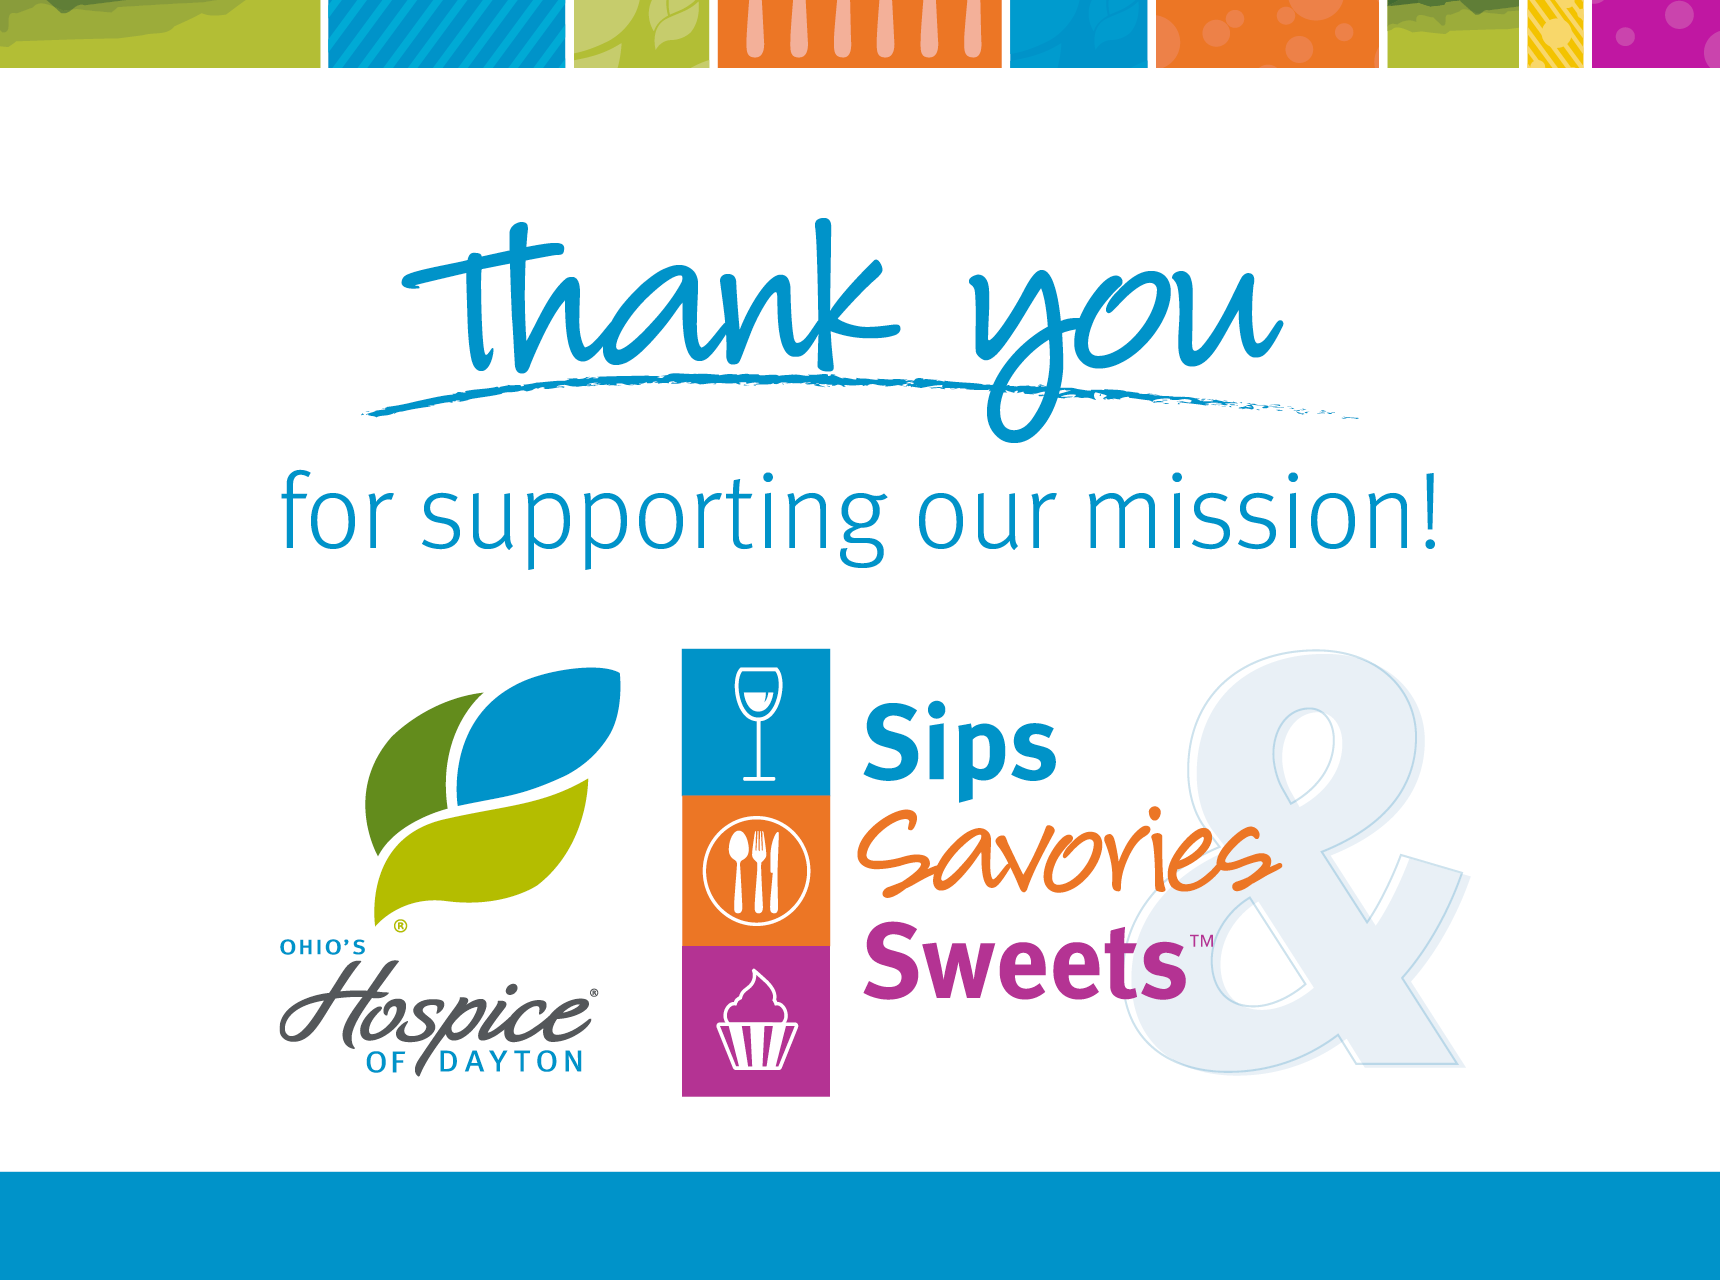 Thank you for supporting our mission! Sips, Savories & Sweets